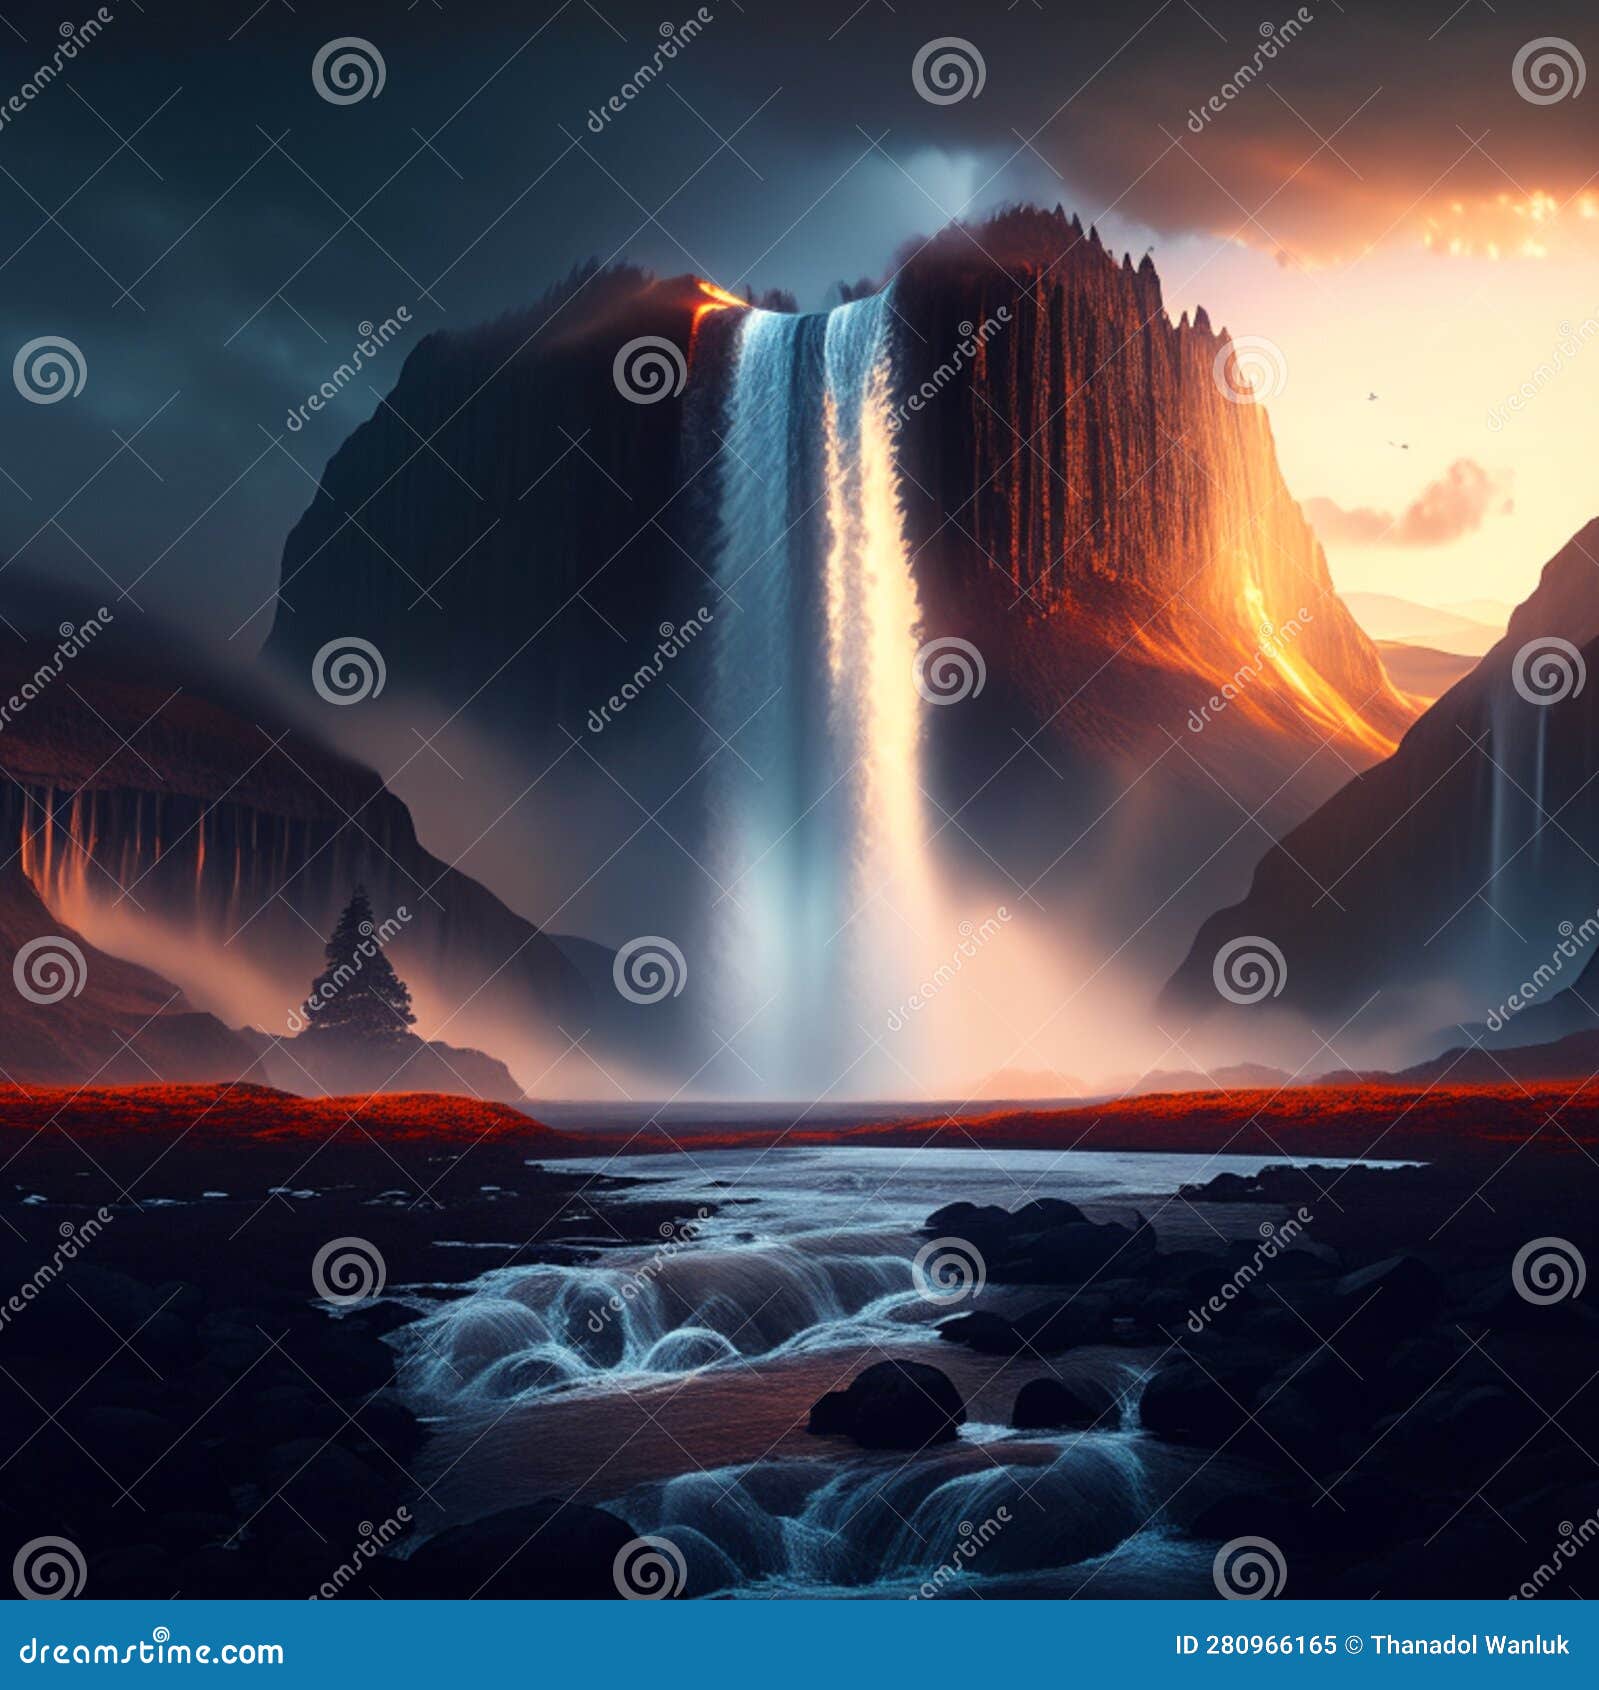 60 Feet In Meters The Waterfall Plunges from a Height of Approximately 60 Meters (197 Feet)  Stock Illustration - Illustration of reflection, screenshot: 280966165